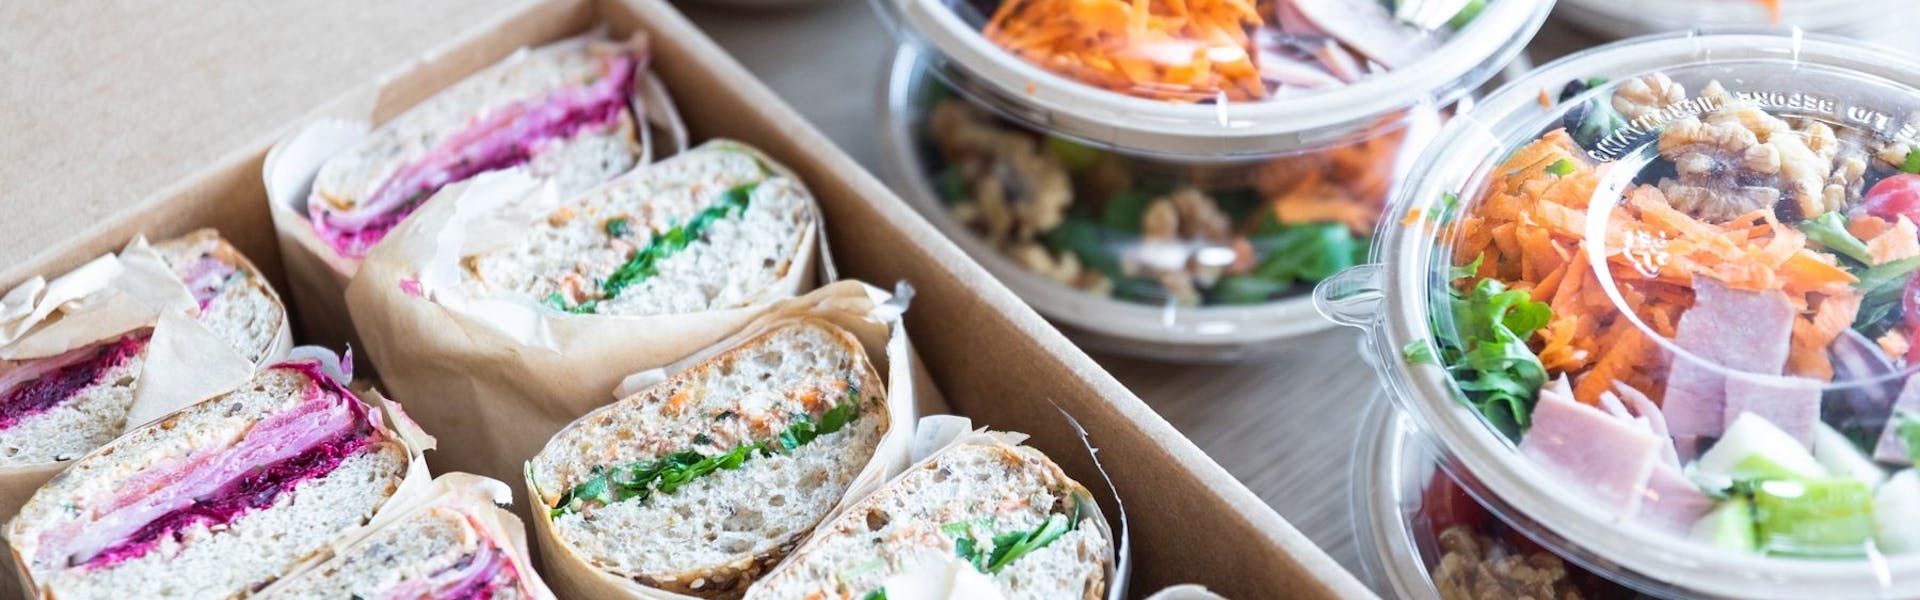 Individually-Wrapped vs. Buffet Style - What's the Best Catering Option?